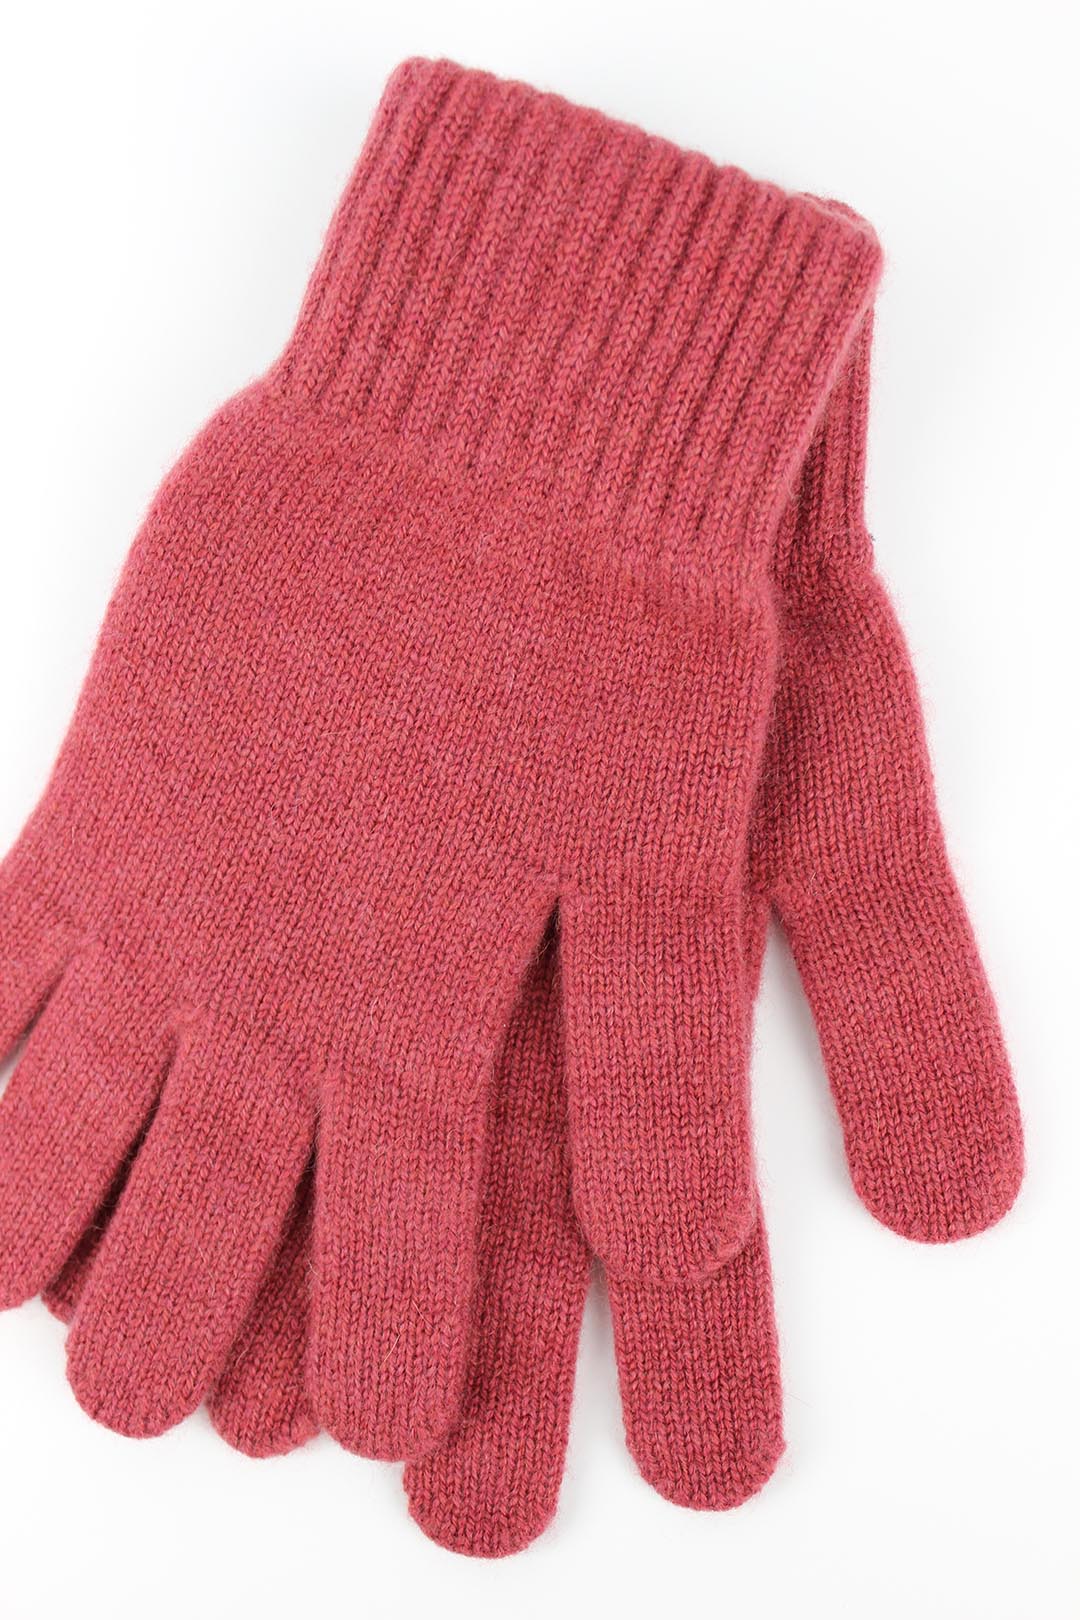 Cashmere gloves in berry shades - rhubarb, raspberry and grape.